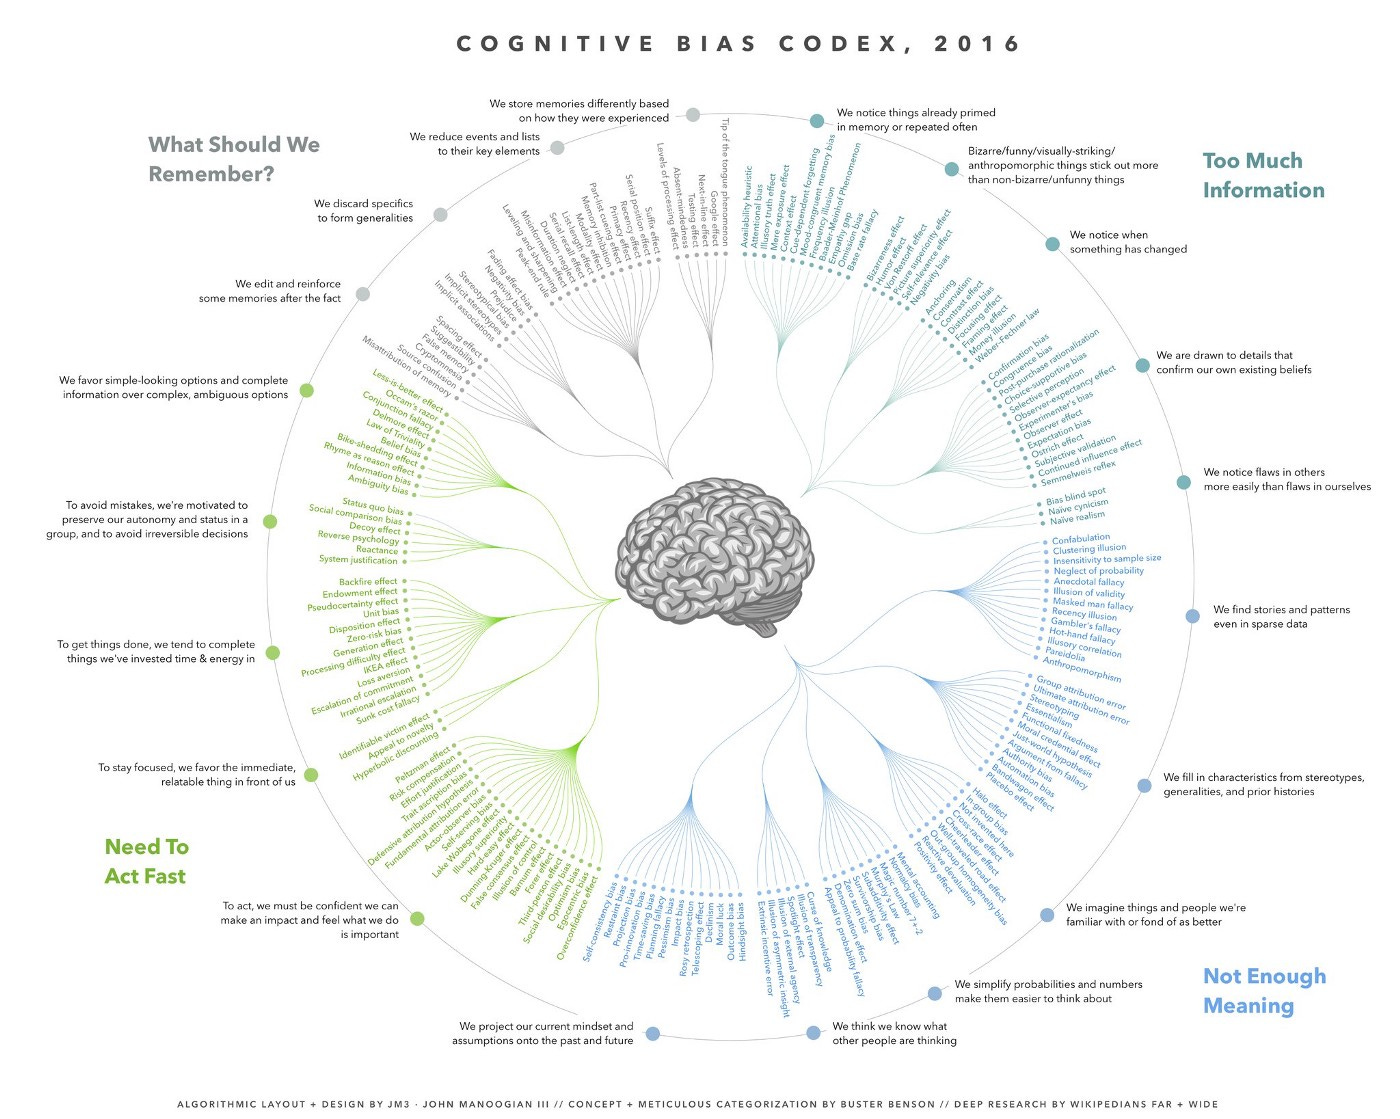 Cognitive Bias Codex by Wikipedia visualizing all the cognitive biases that exist, their meanings and the problems they try to solve. 